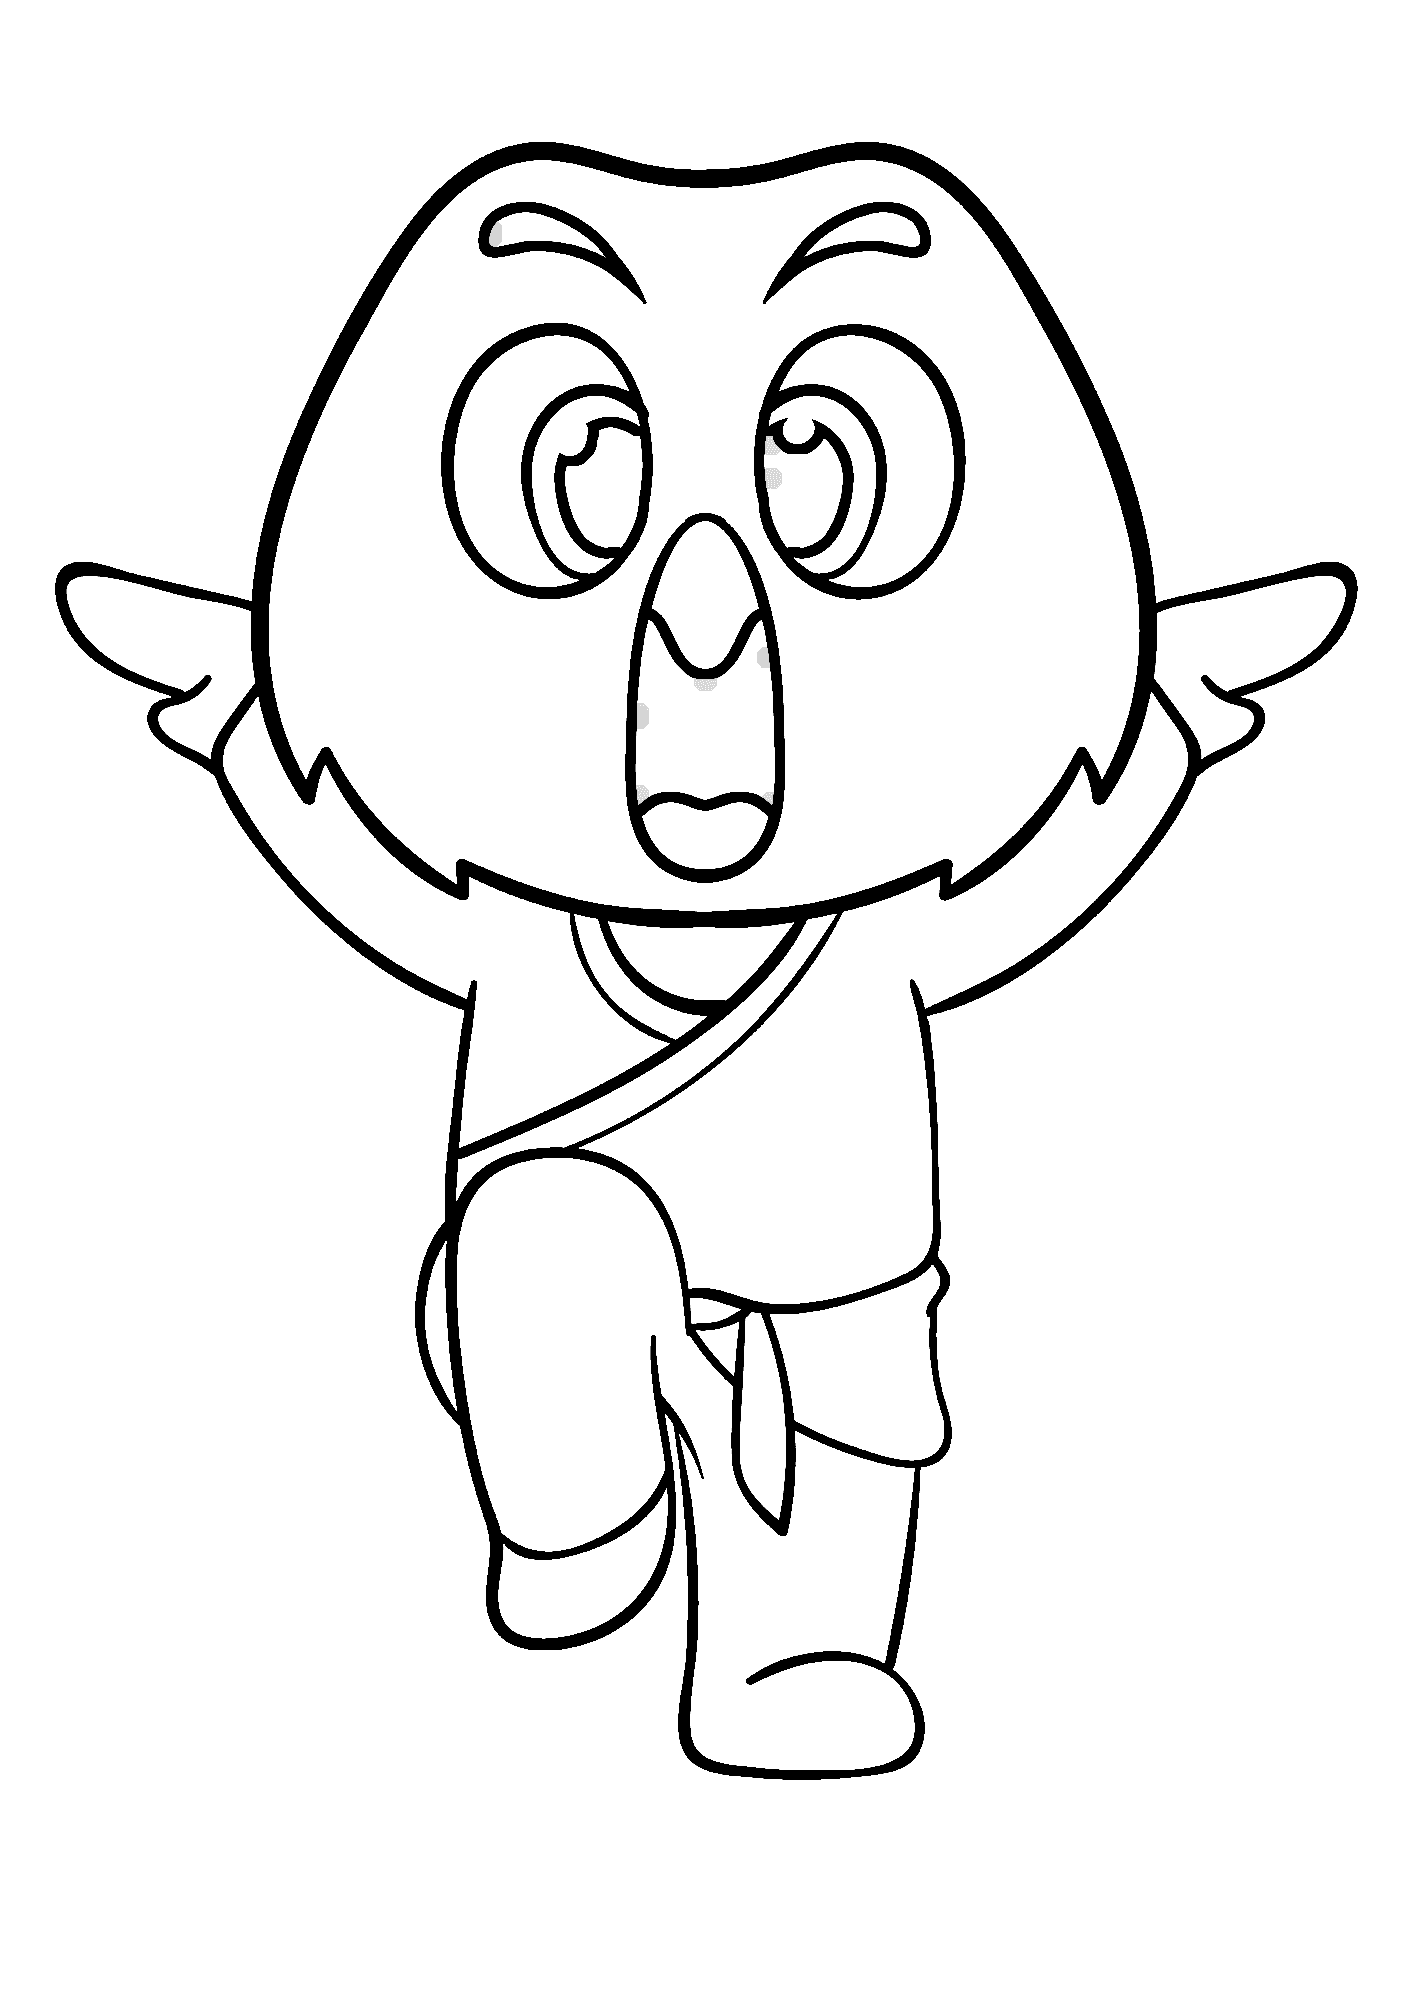 Eagles Logo Coloring Pages